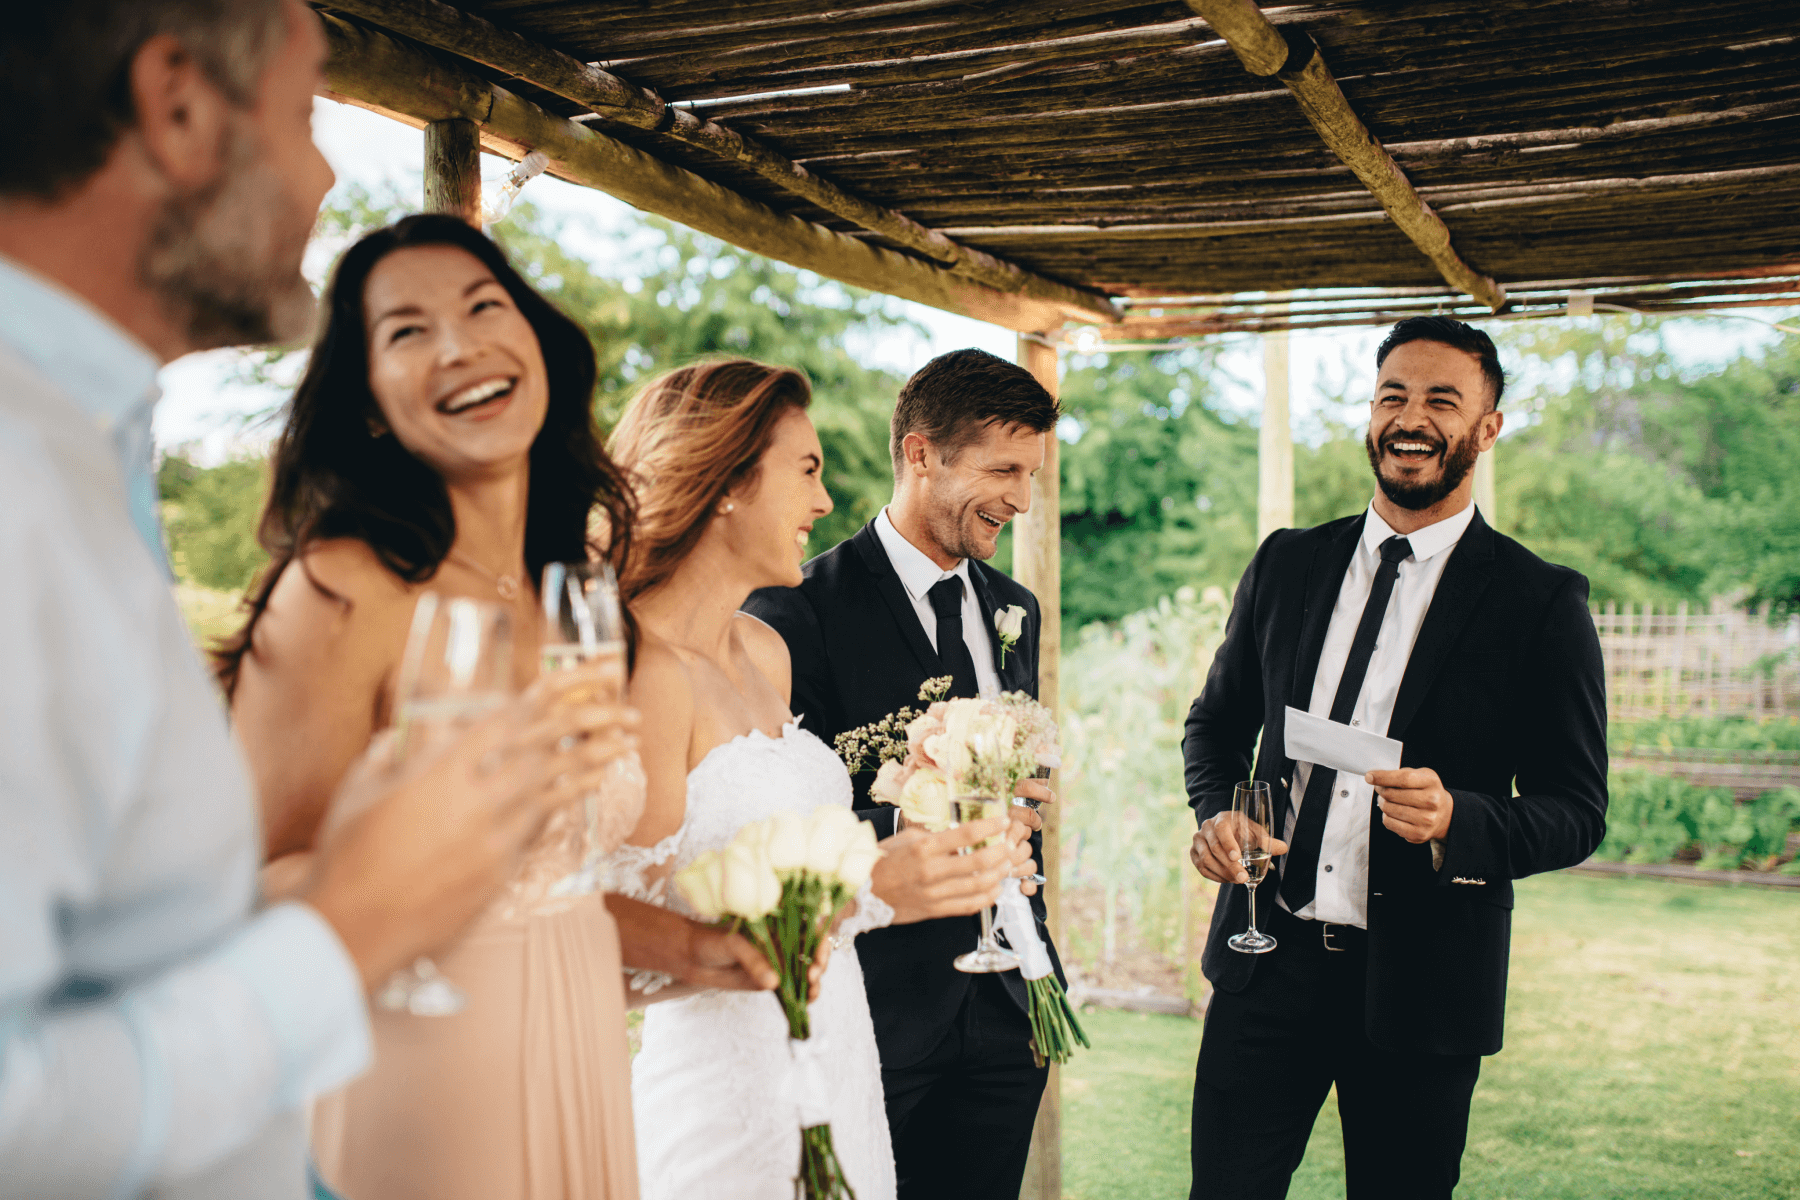 Photo of a well-dressed man giving a speech to a laughing bride and groom and two guests.